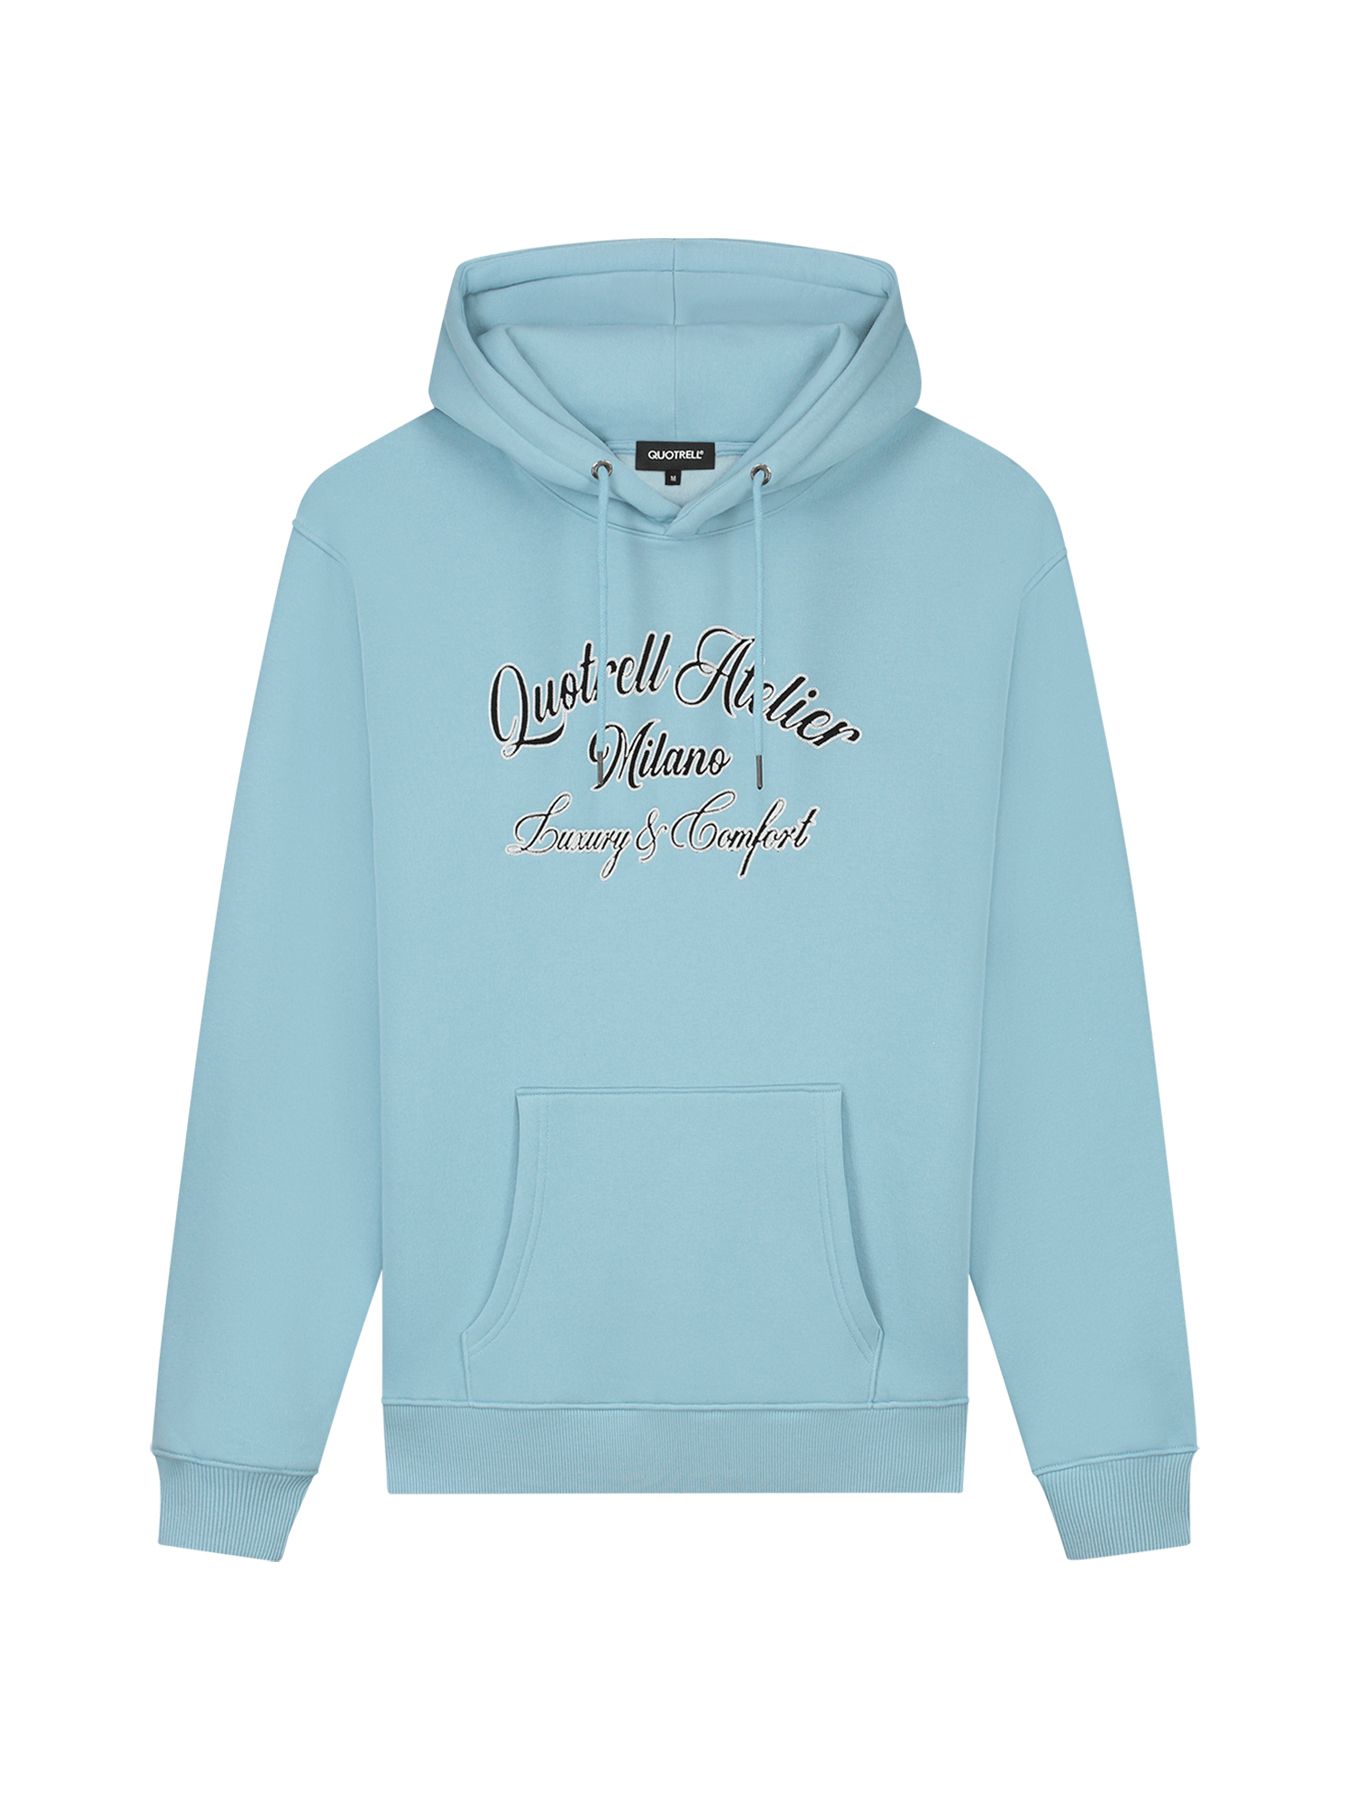 Quotrell Atelier milano chain hoodie Light Blue/White 00105213-LBW